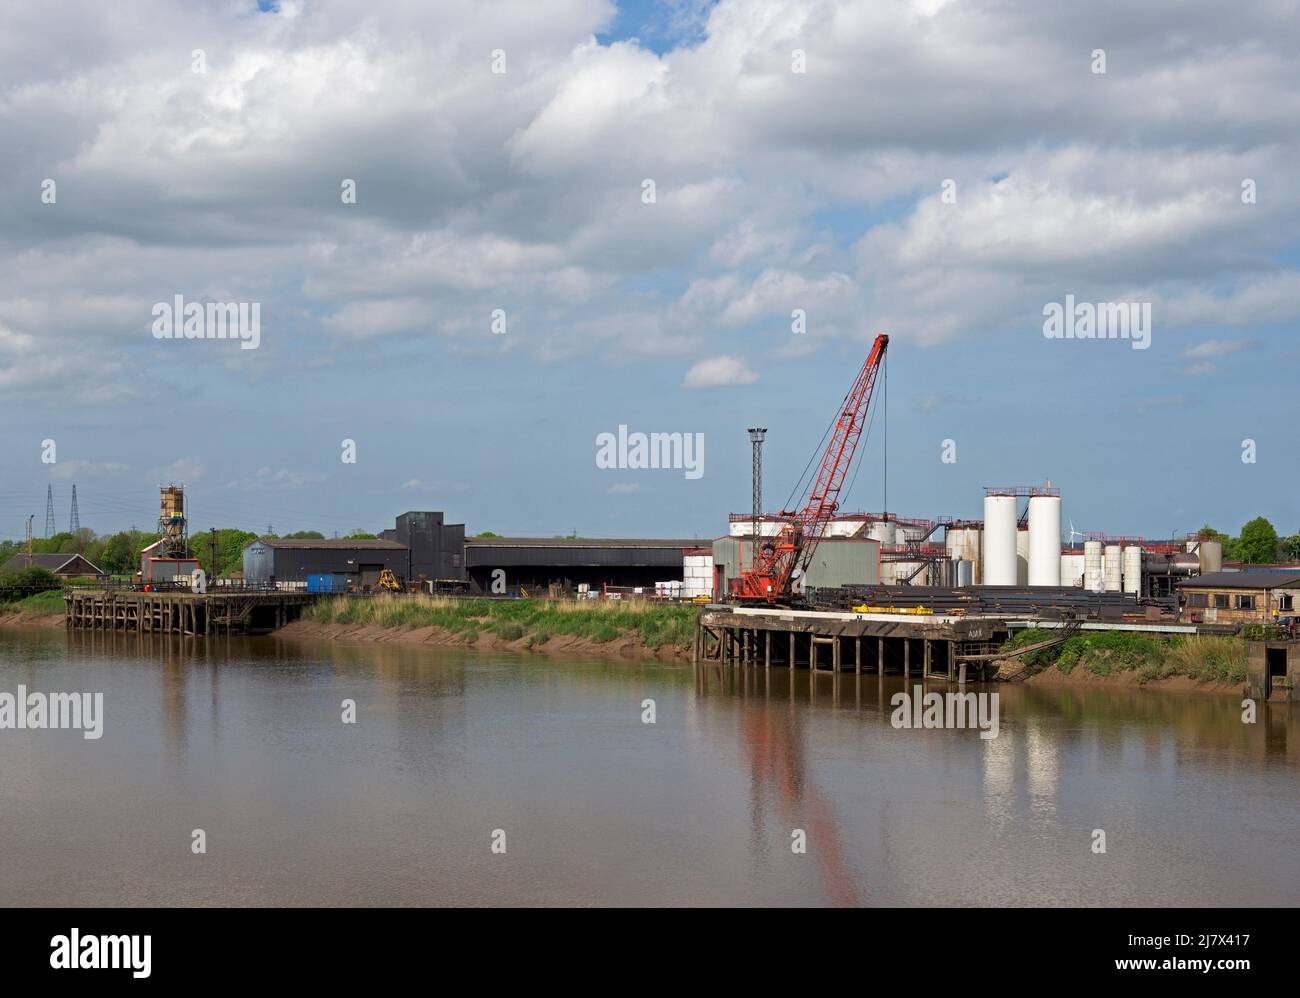 The River Trent and Althorpe Wharf, North Lincolnshire, England UK Stock Photo